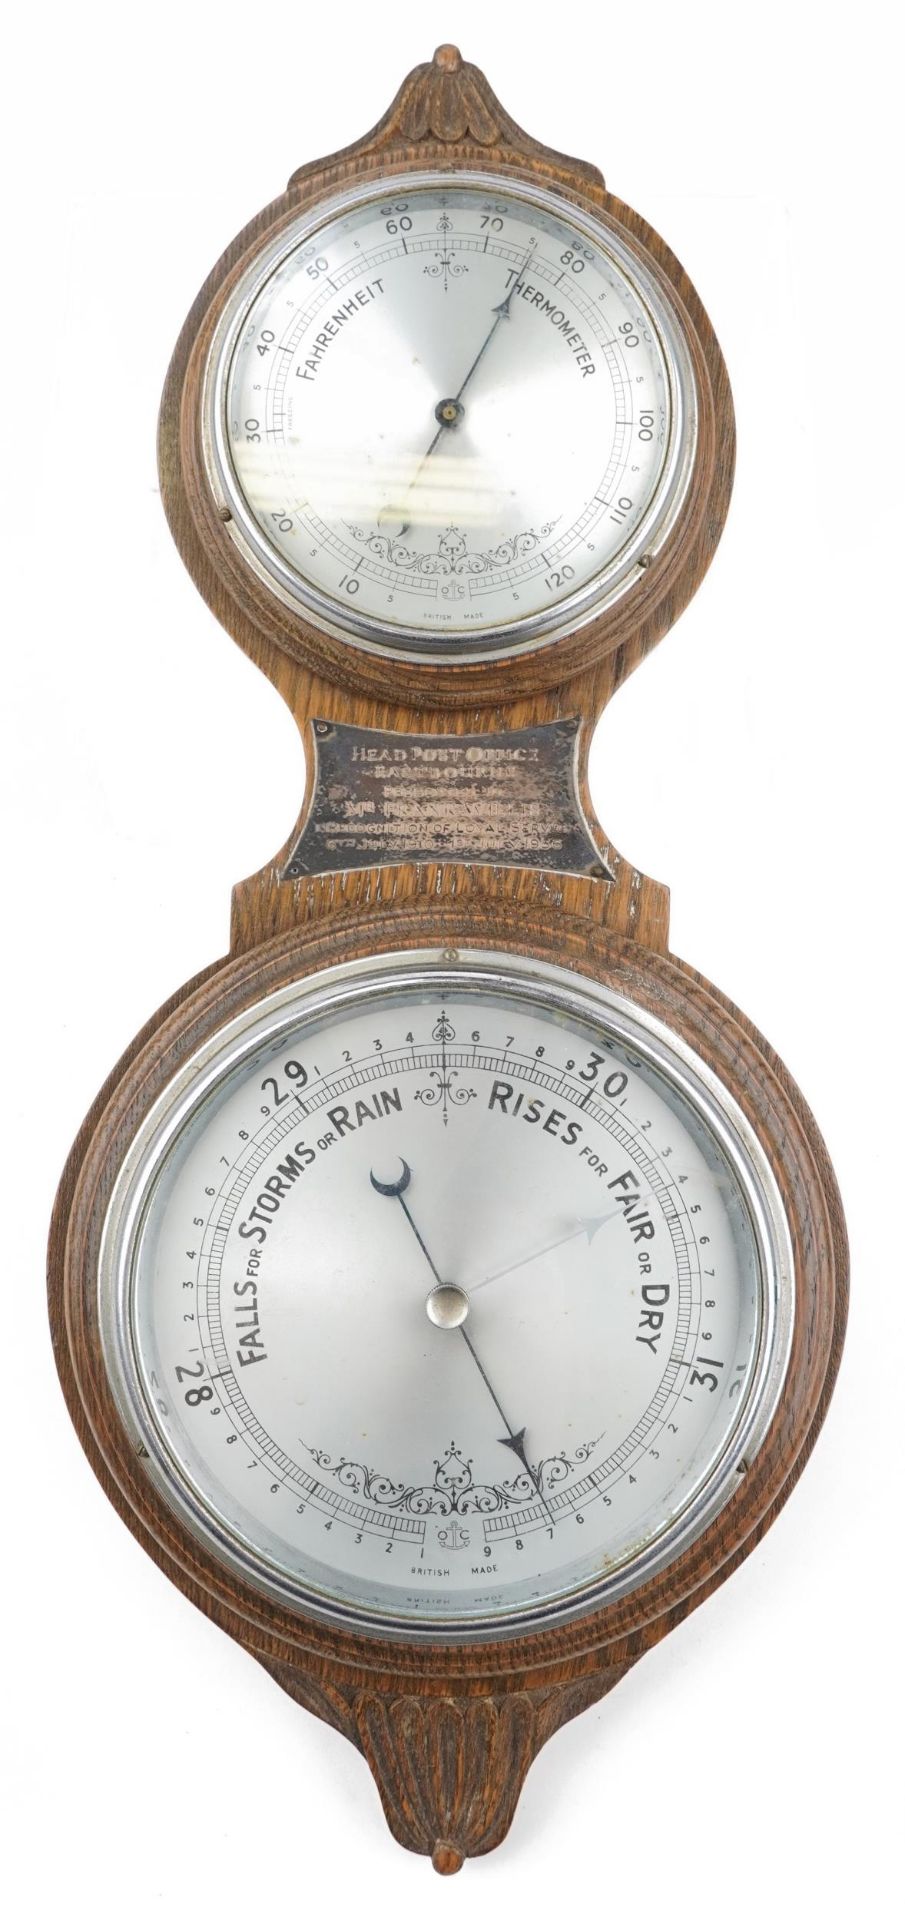 Mid 20th century oak wall barometer with thermometer having silvered dials and white metal plaque